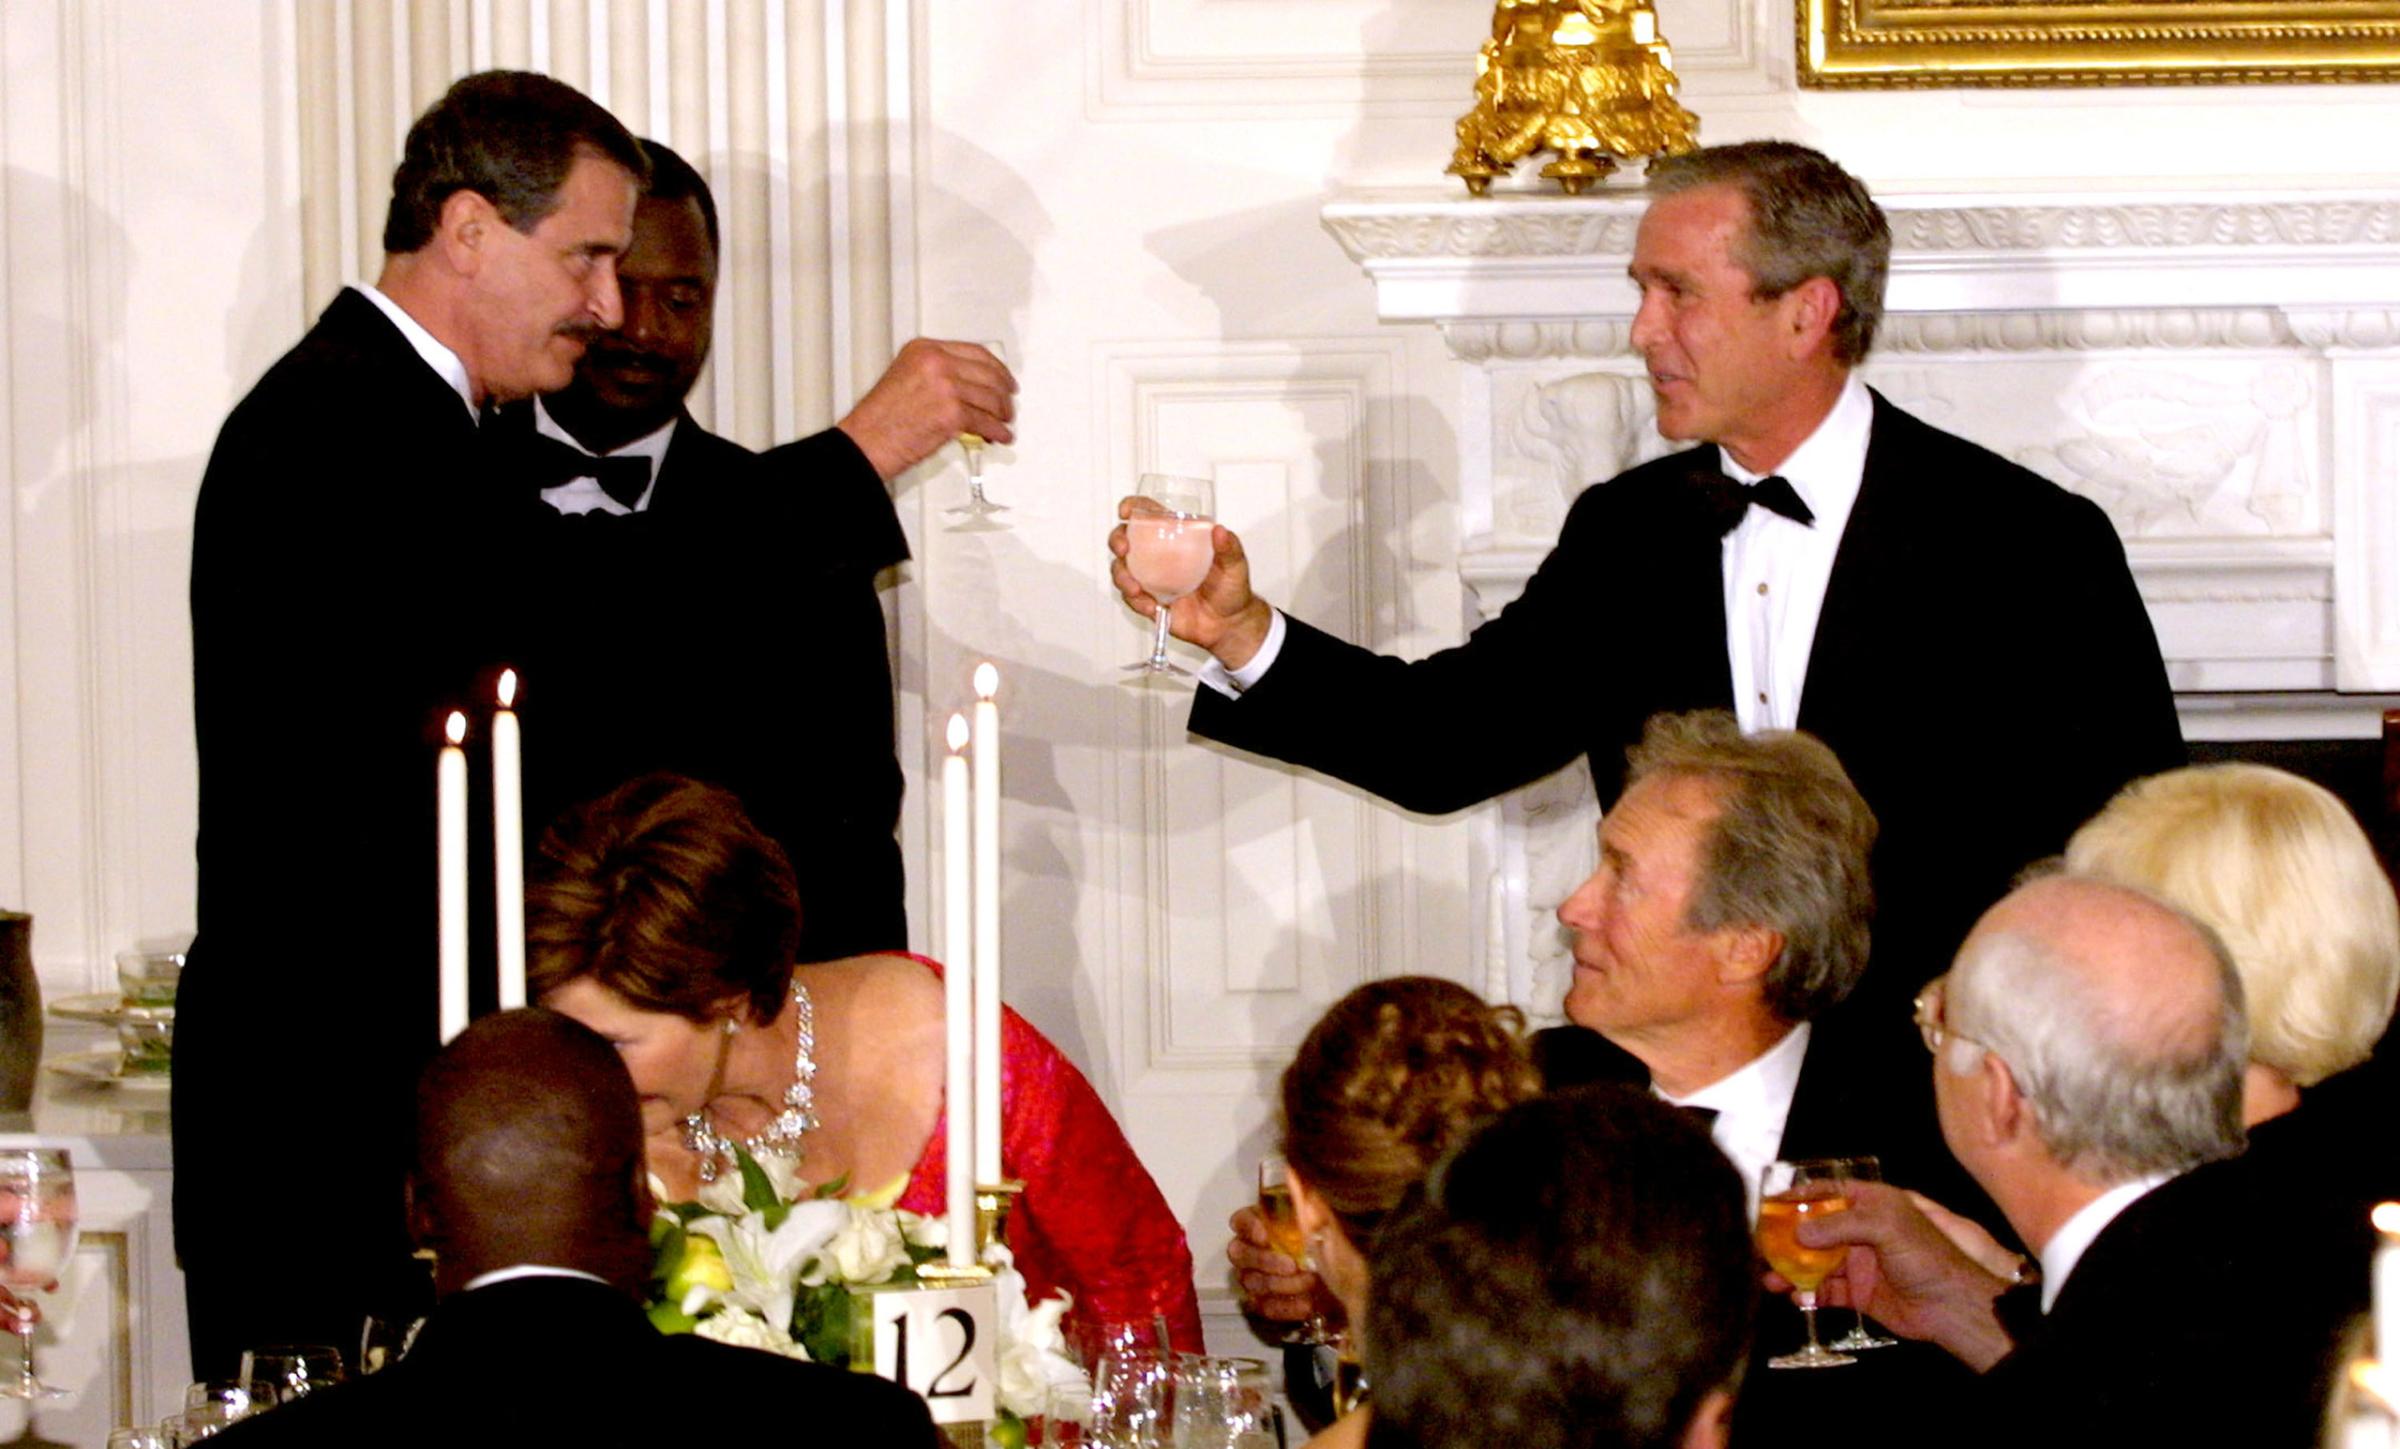 State Dinner for Vicente Fox at White House